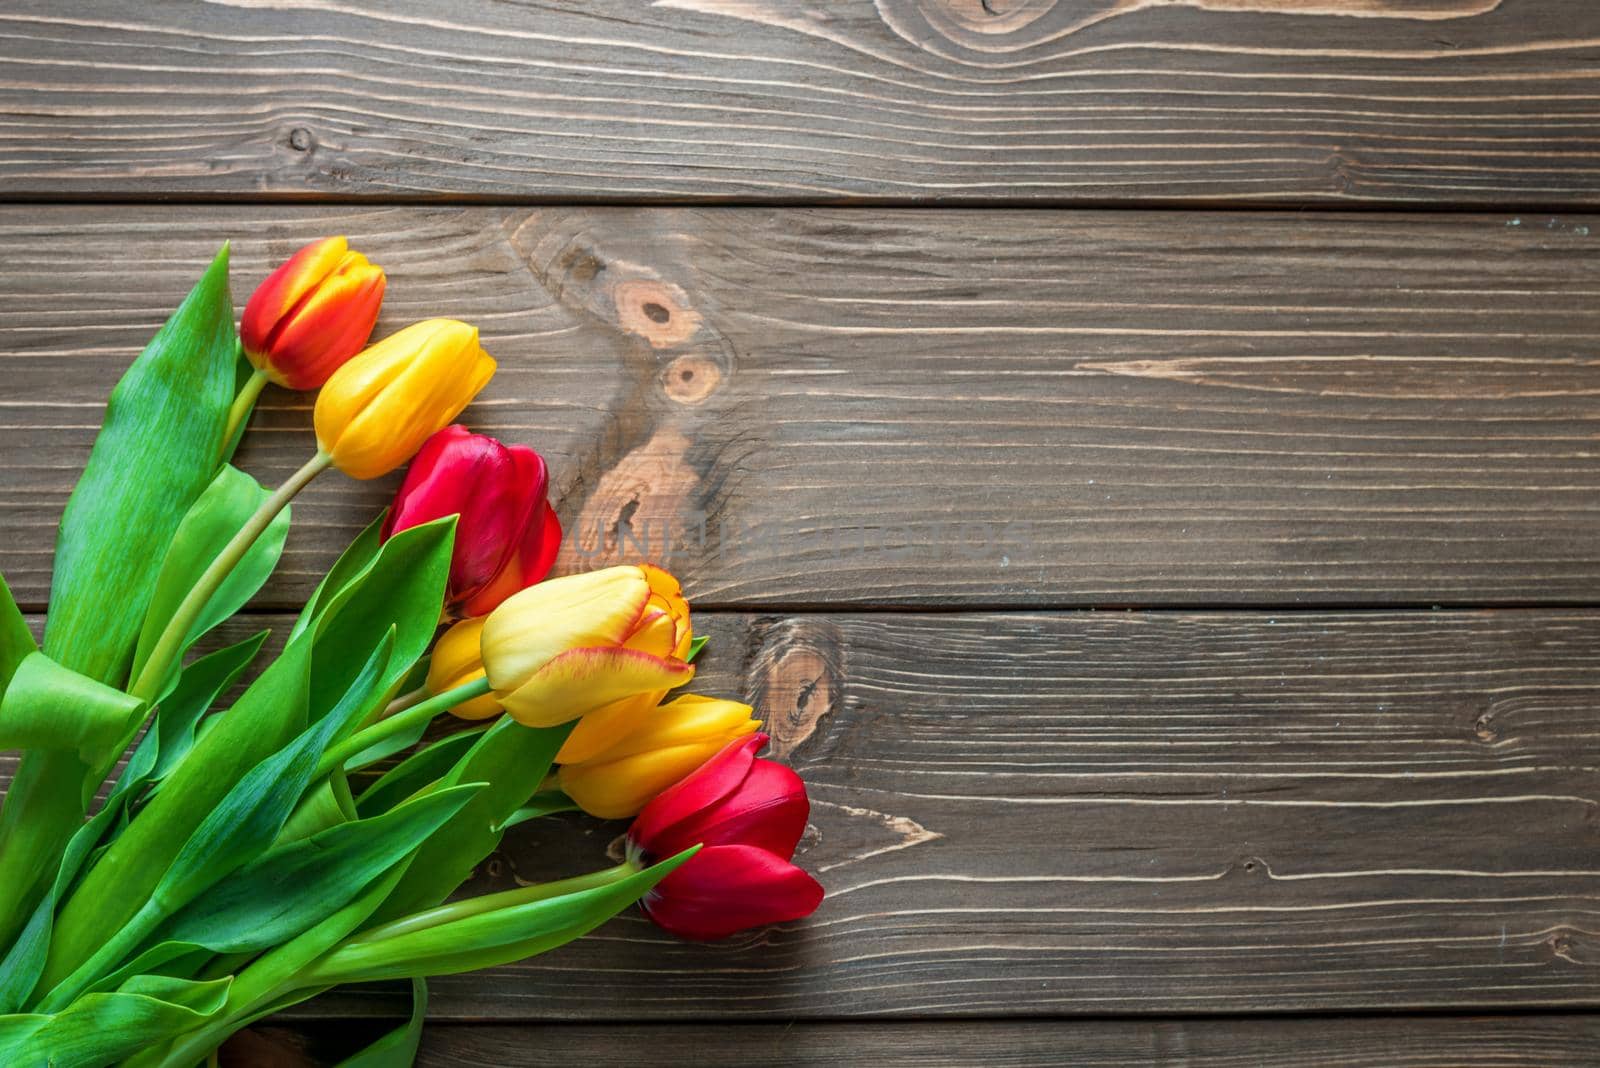  Bouquet of tulips in a paper shopping bag on a wooden background, concept of discounts and sales on the Women's Day or Mother's Day or Easter